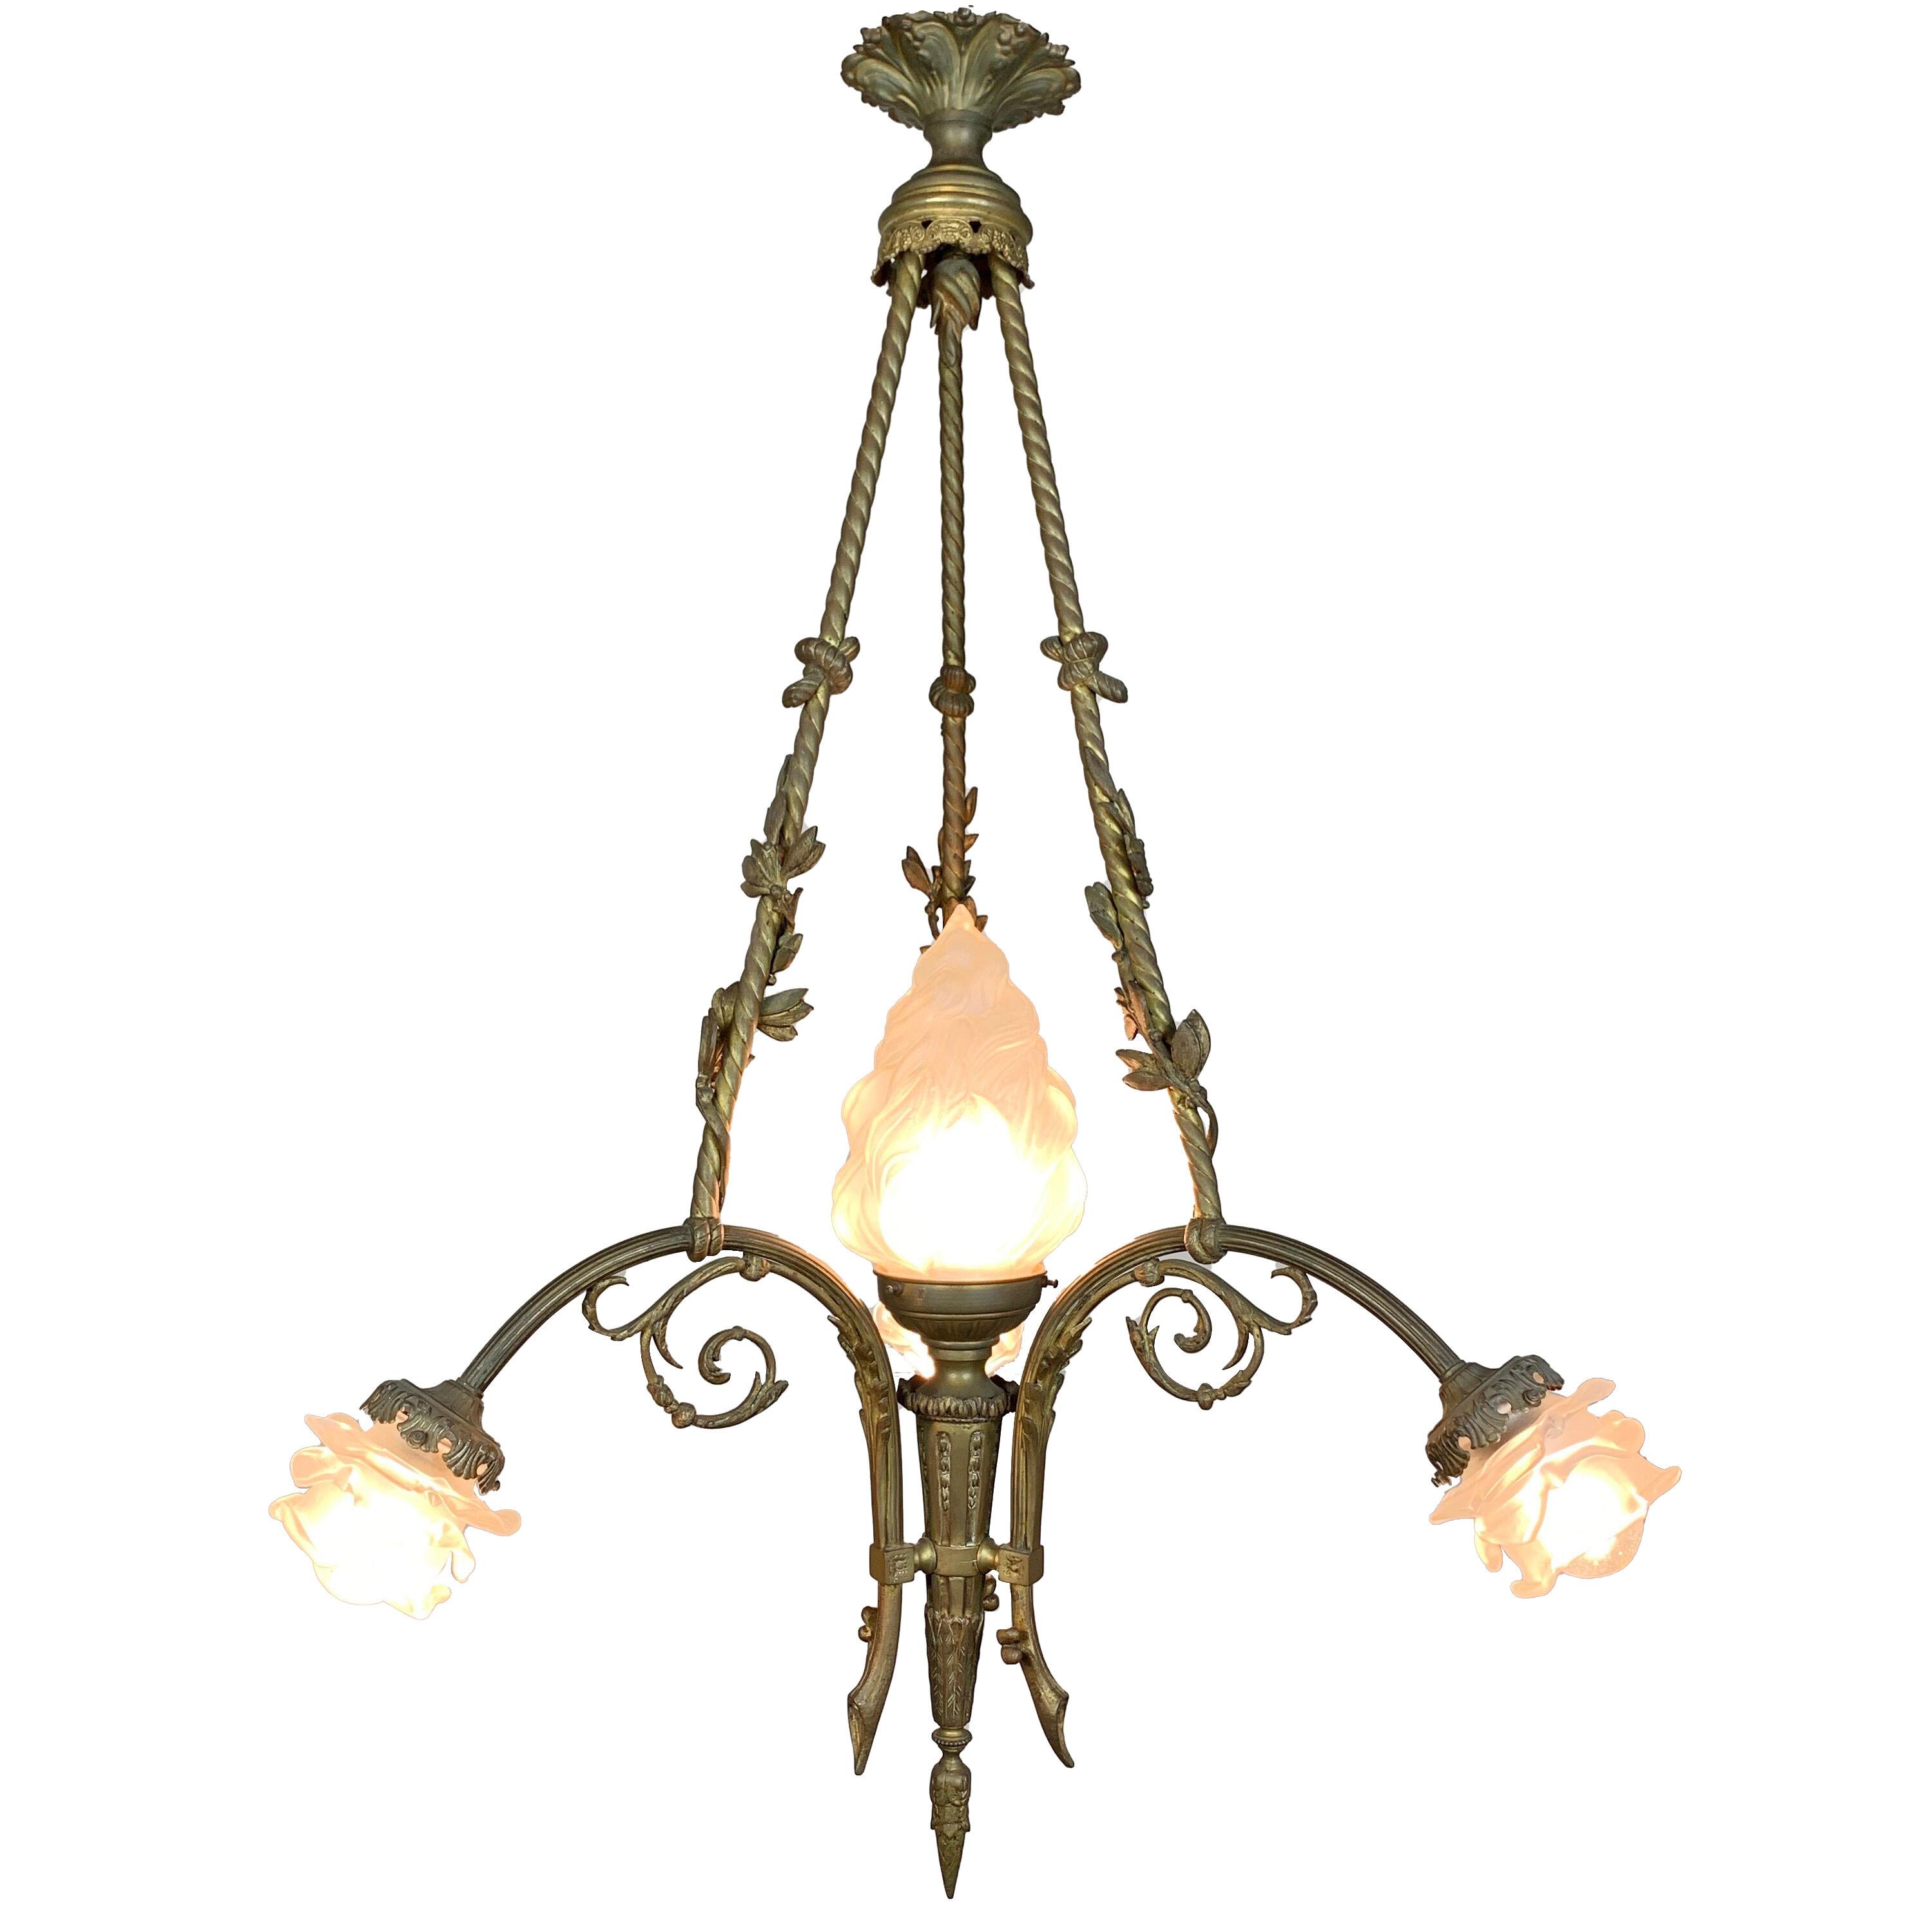  Art Nouveau Bronze and Glass Torchiere and Flower Chandelier circa 1905